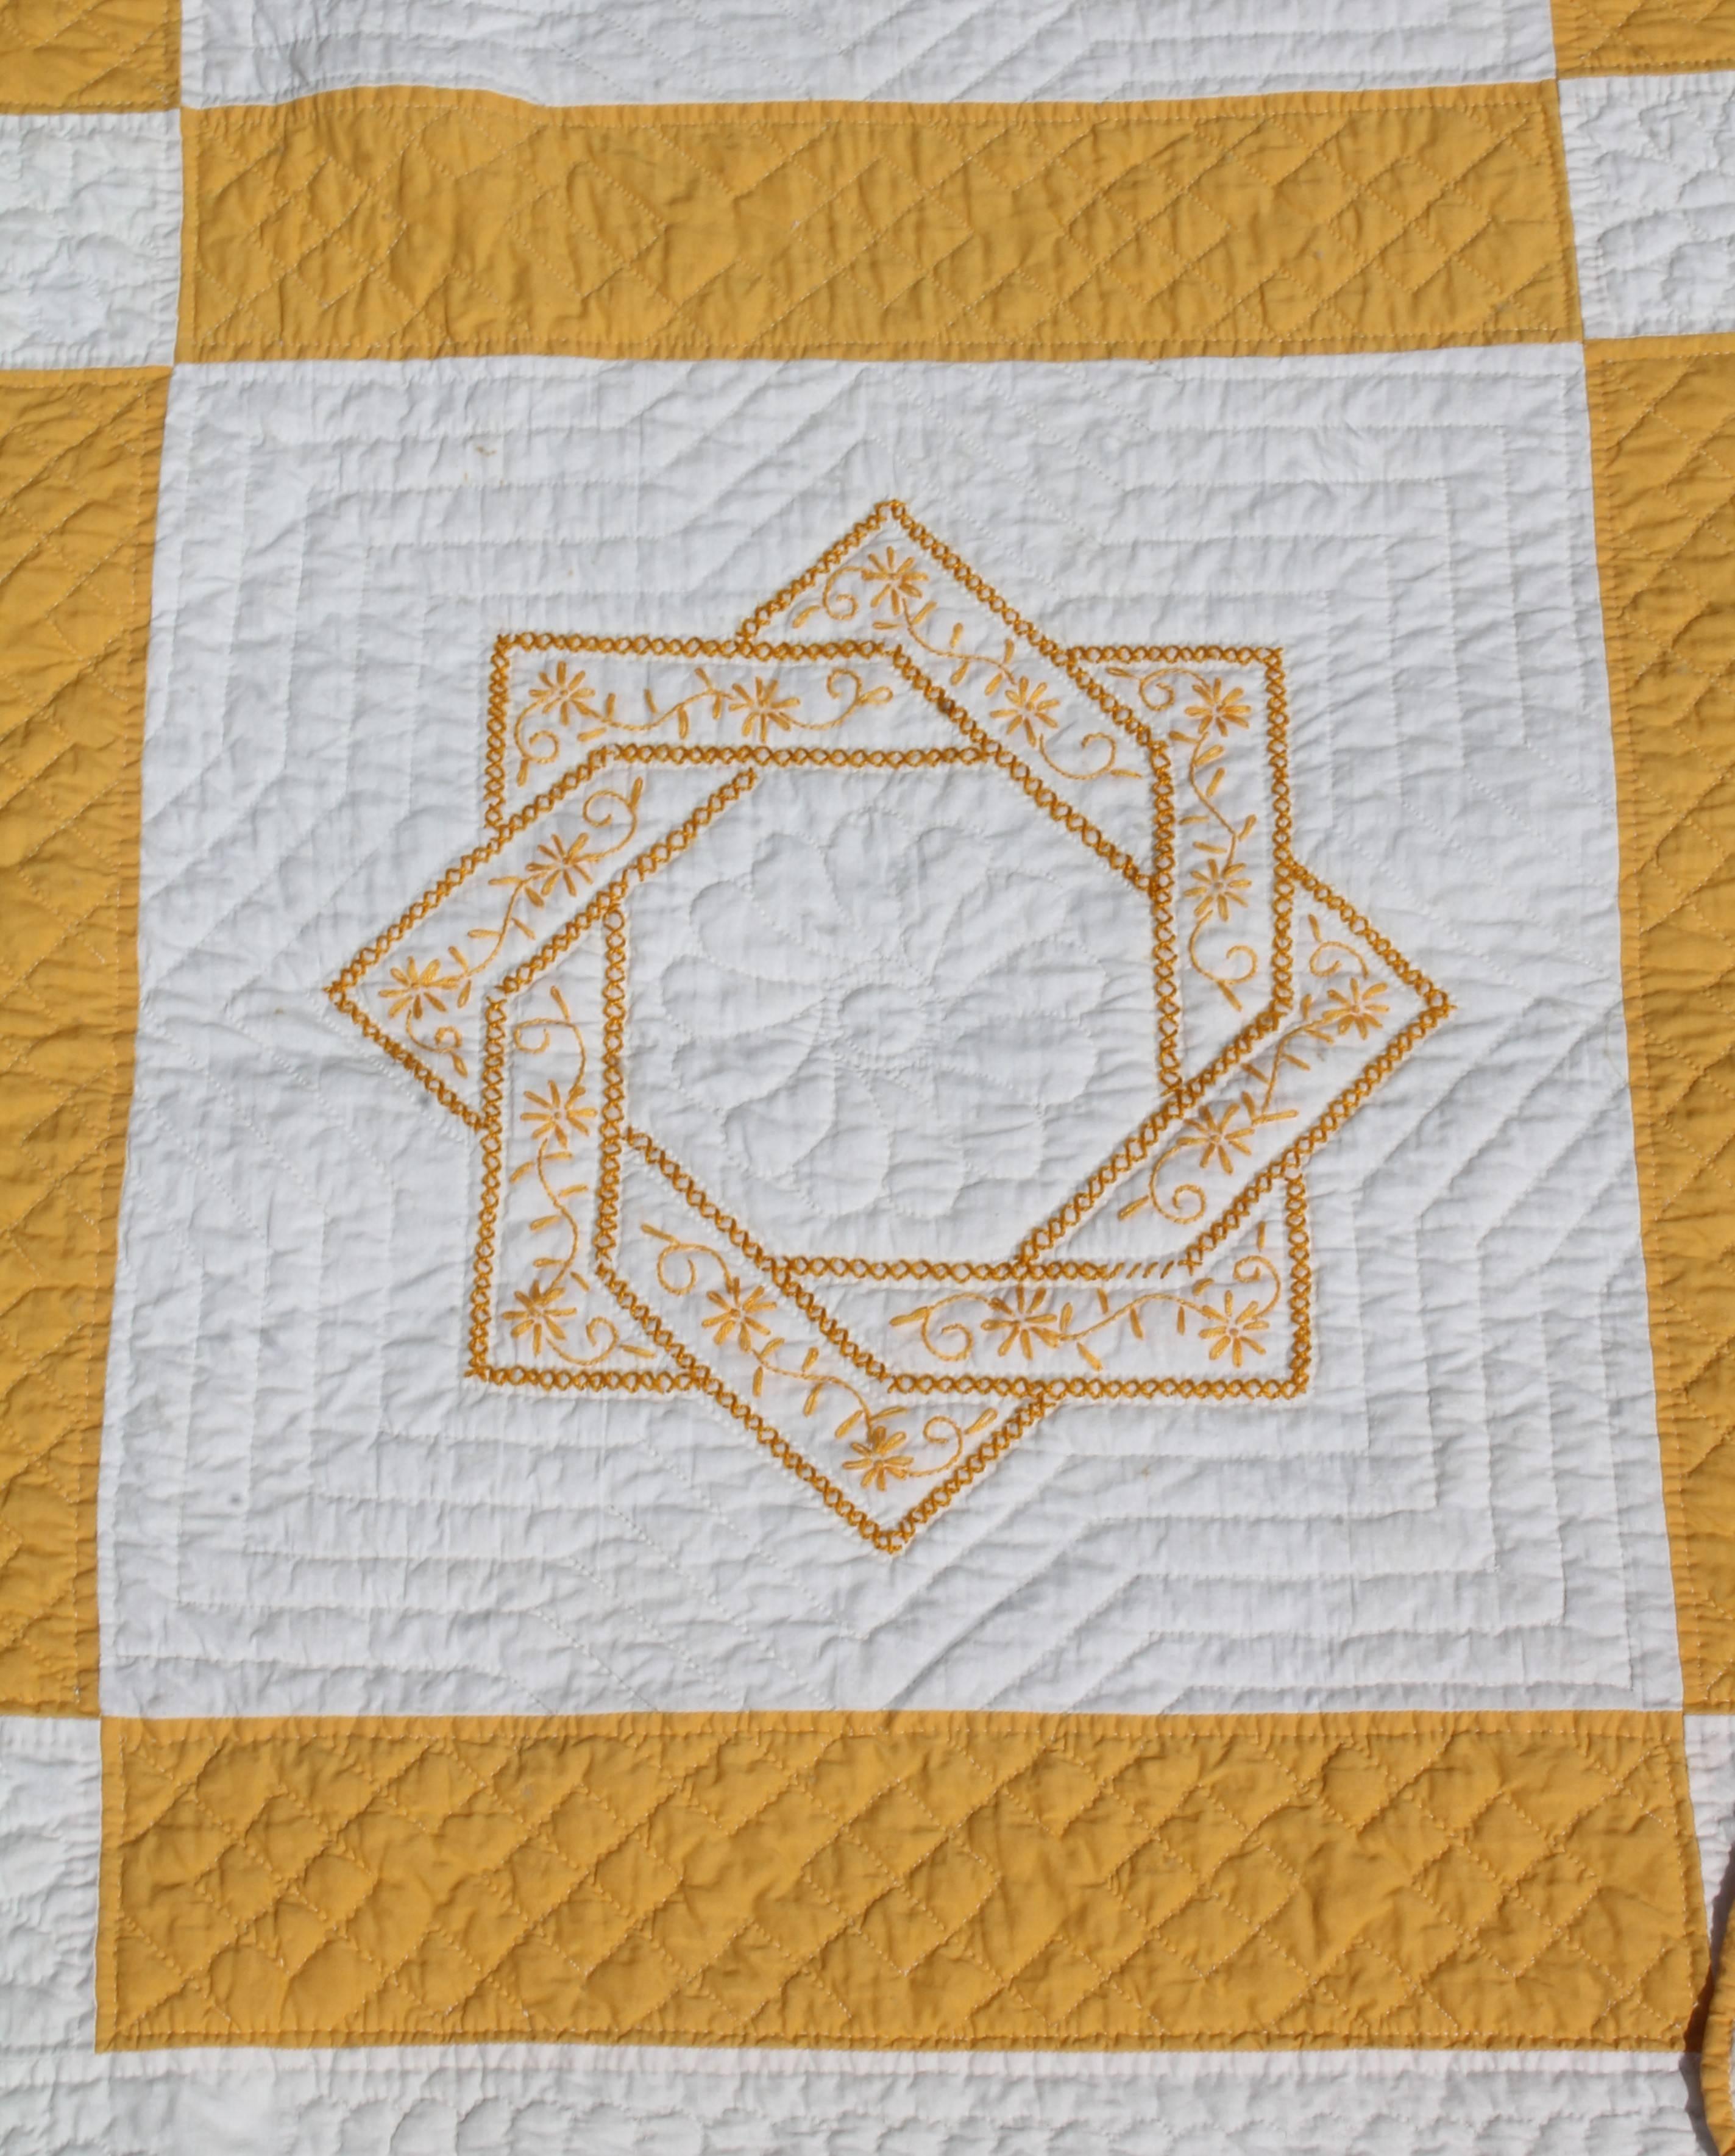 Hand-Crafted Early Fancy Quilted and Embroidered Golden Rod Qulit Embroidery